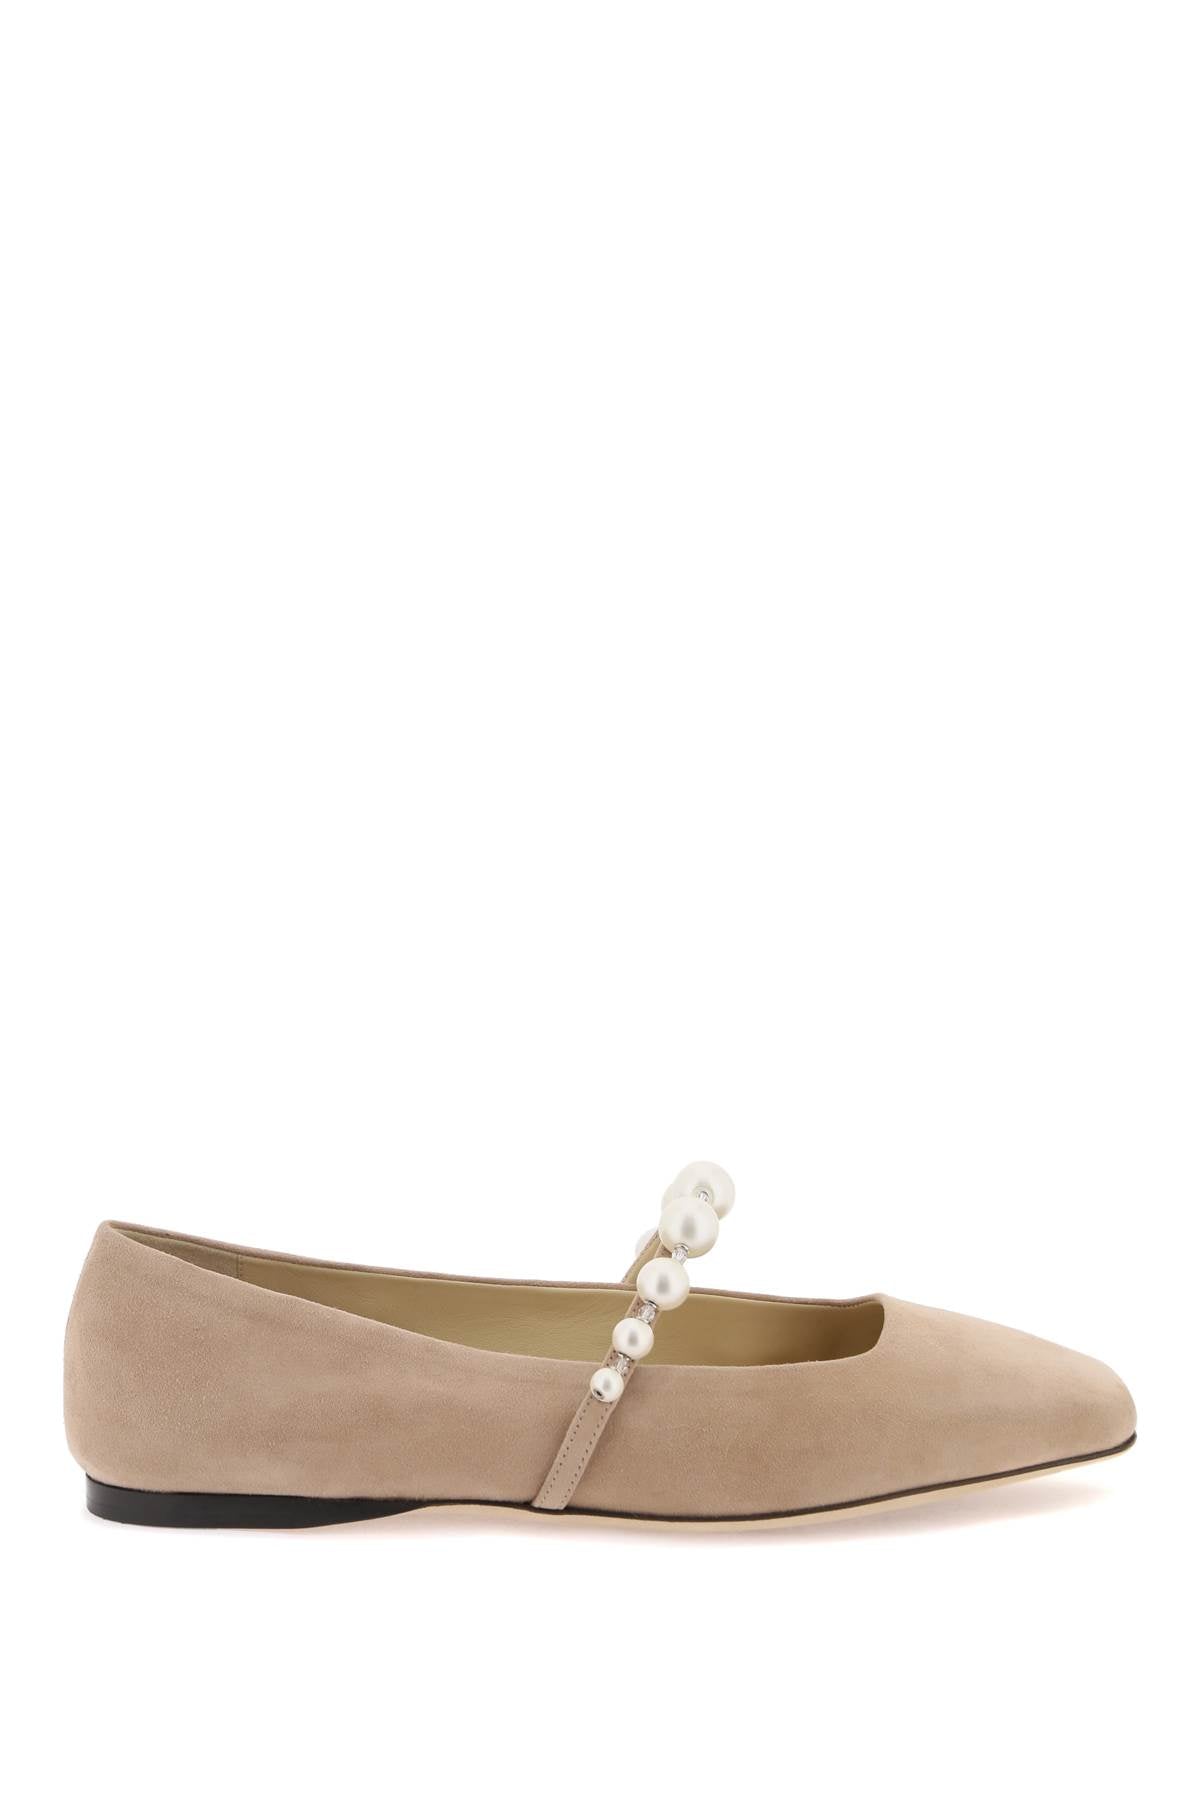 Shop Jimmy Choo Grey Suede Leather Ballerina Flats With Degrade Pearls